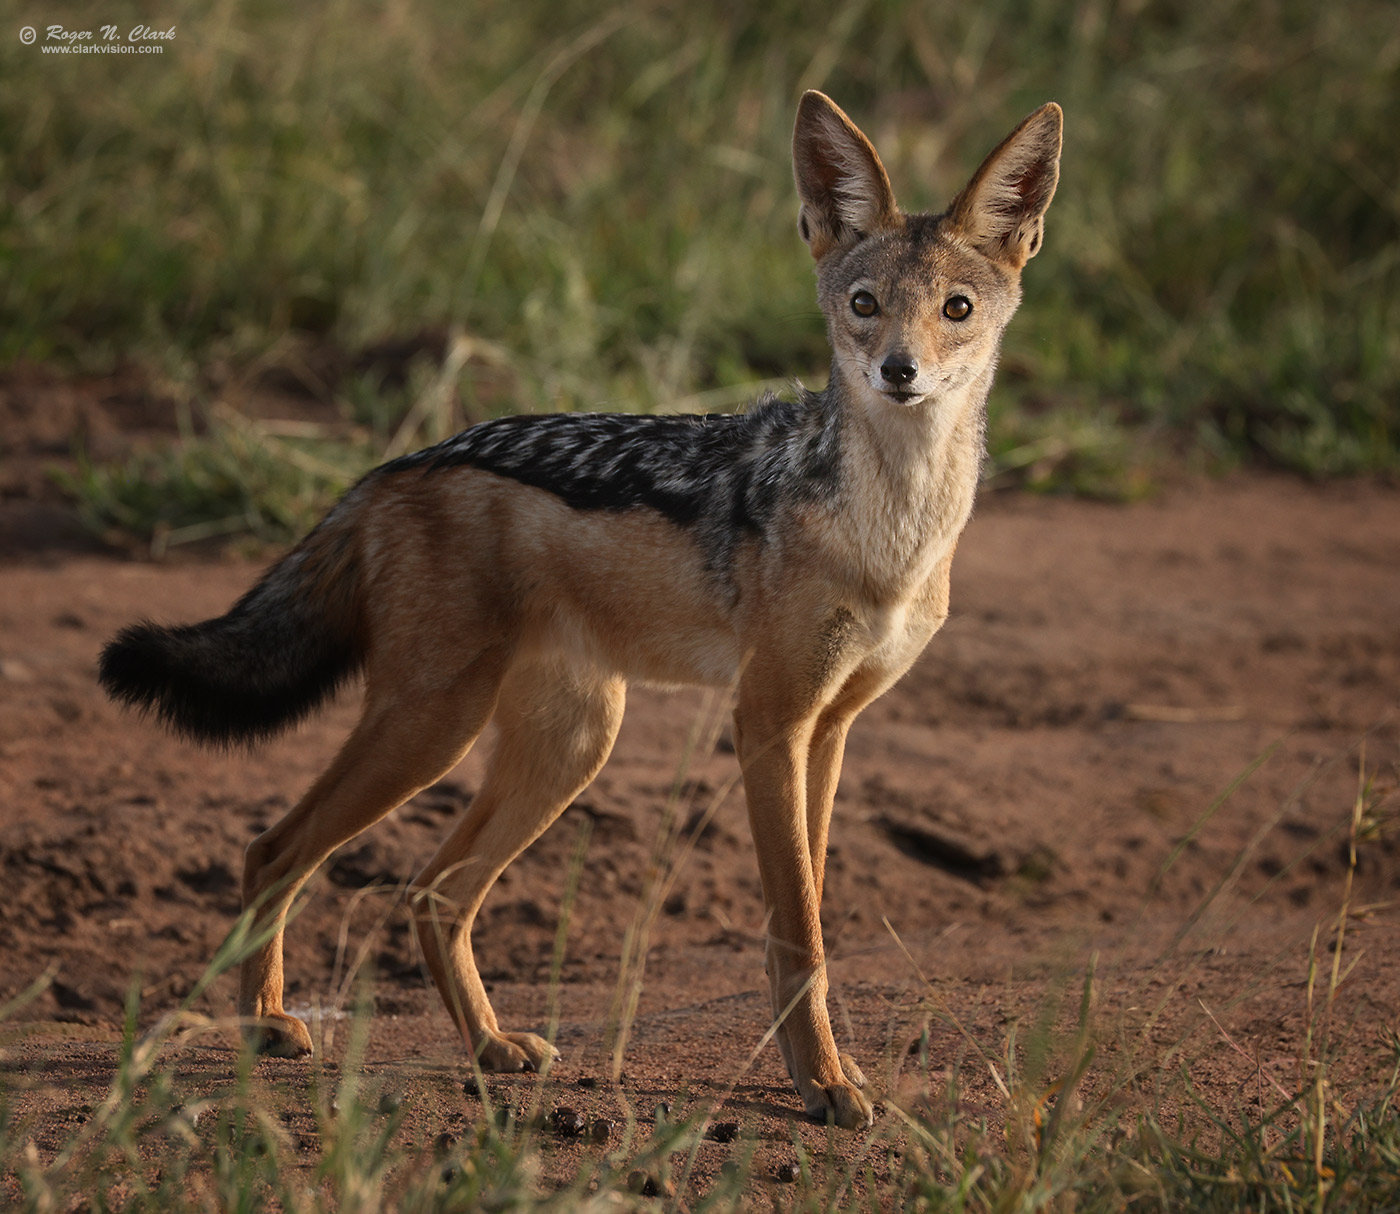 image young-jackal-c02-23-2024-4C3A3064-b-1400s.jpg is Copyrighted by Roger N. Clark, www.clarkvision.com